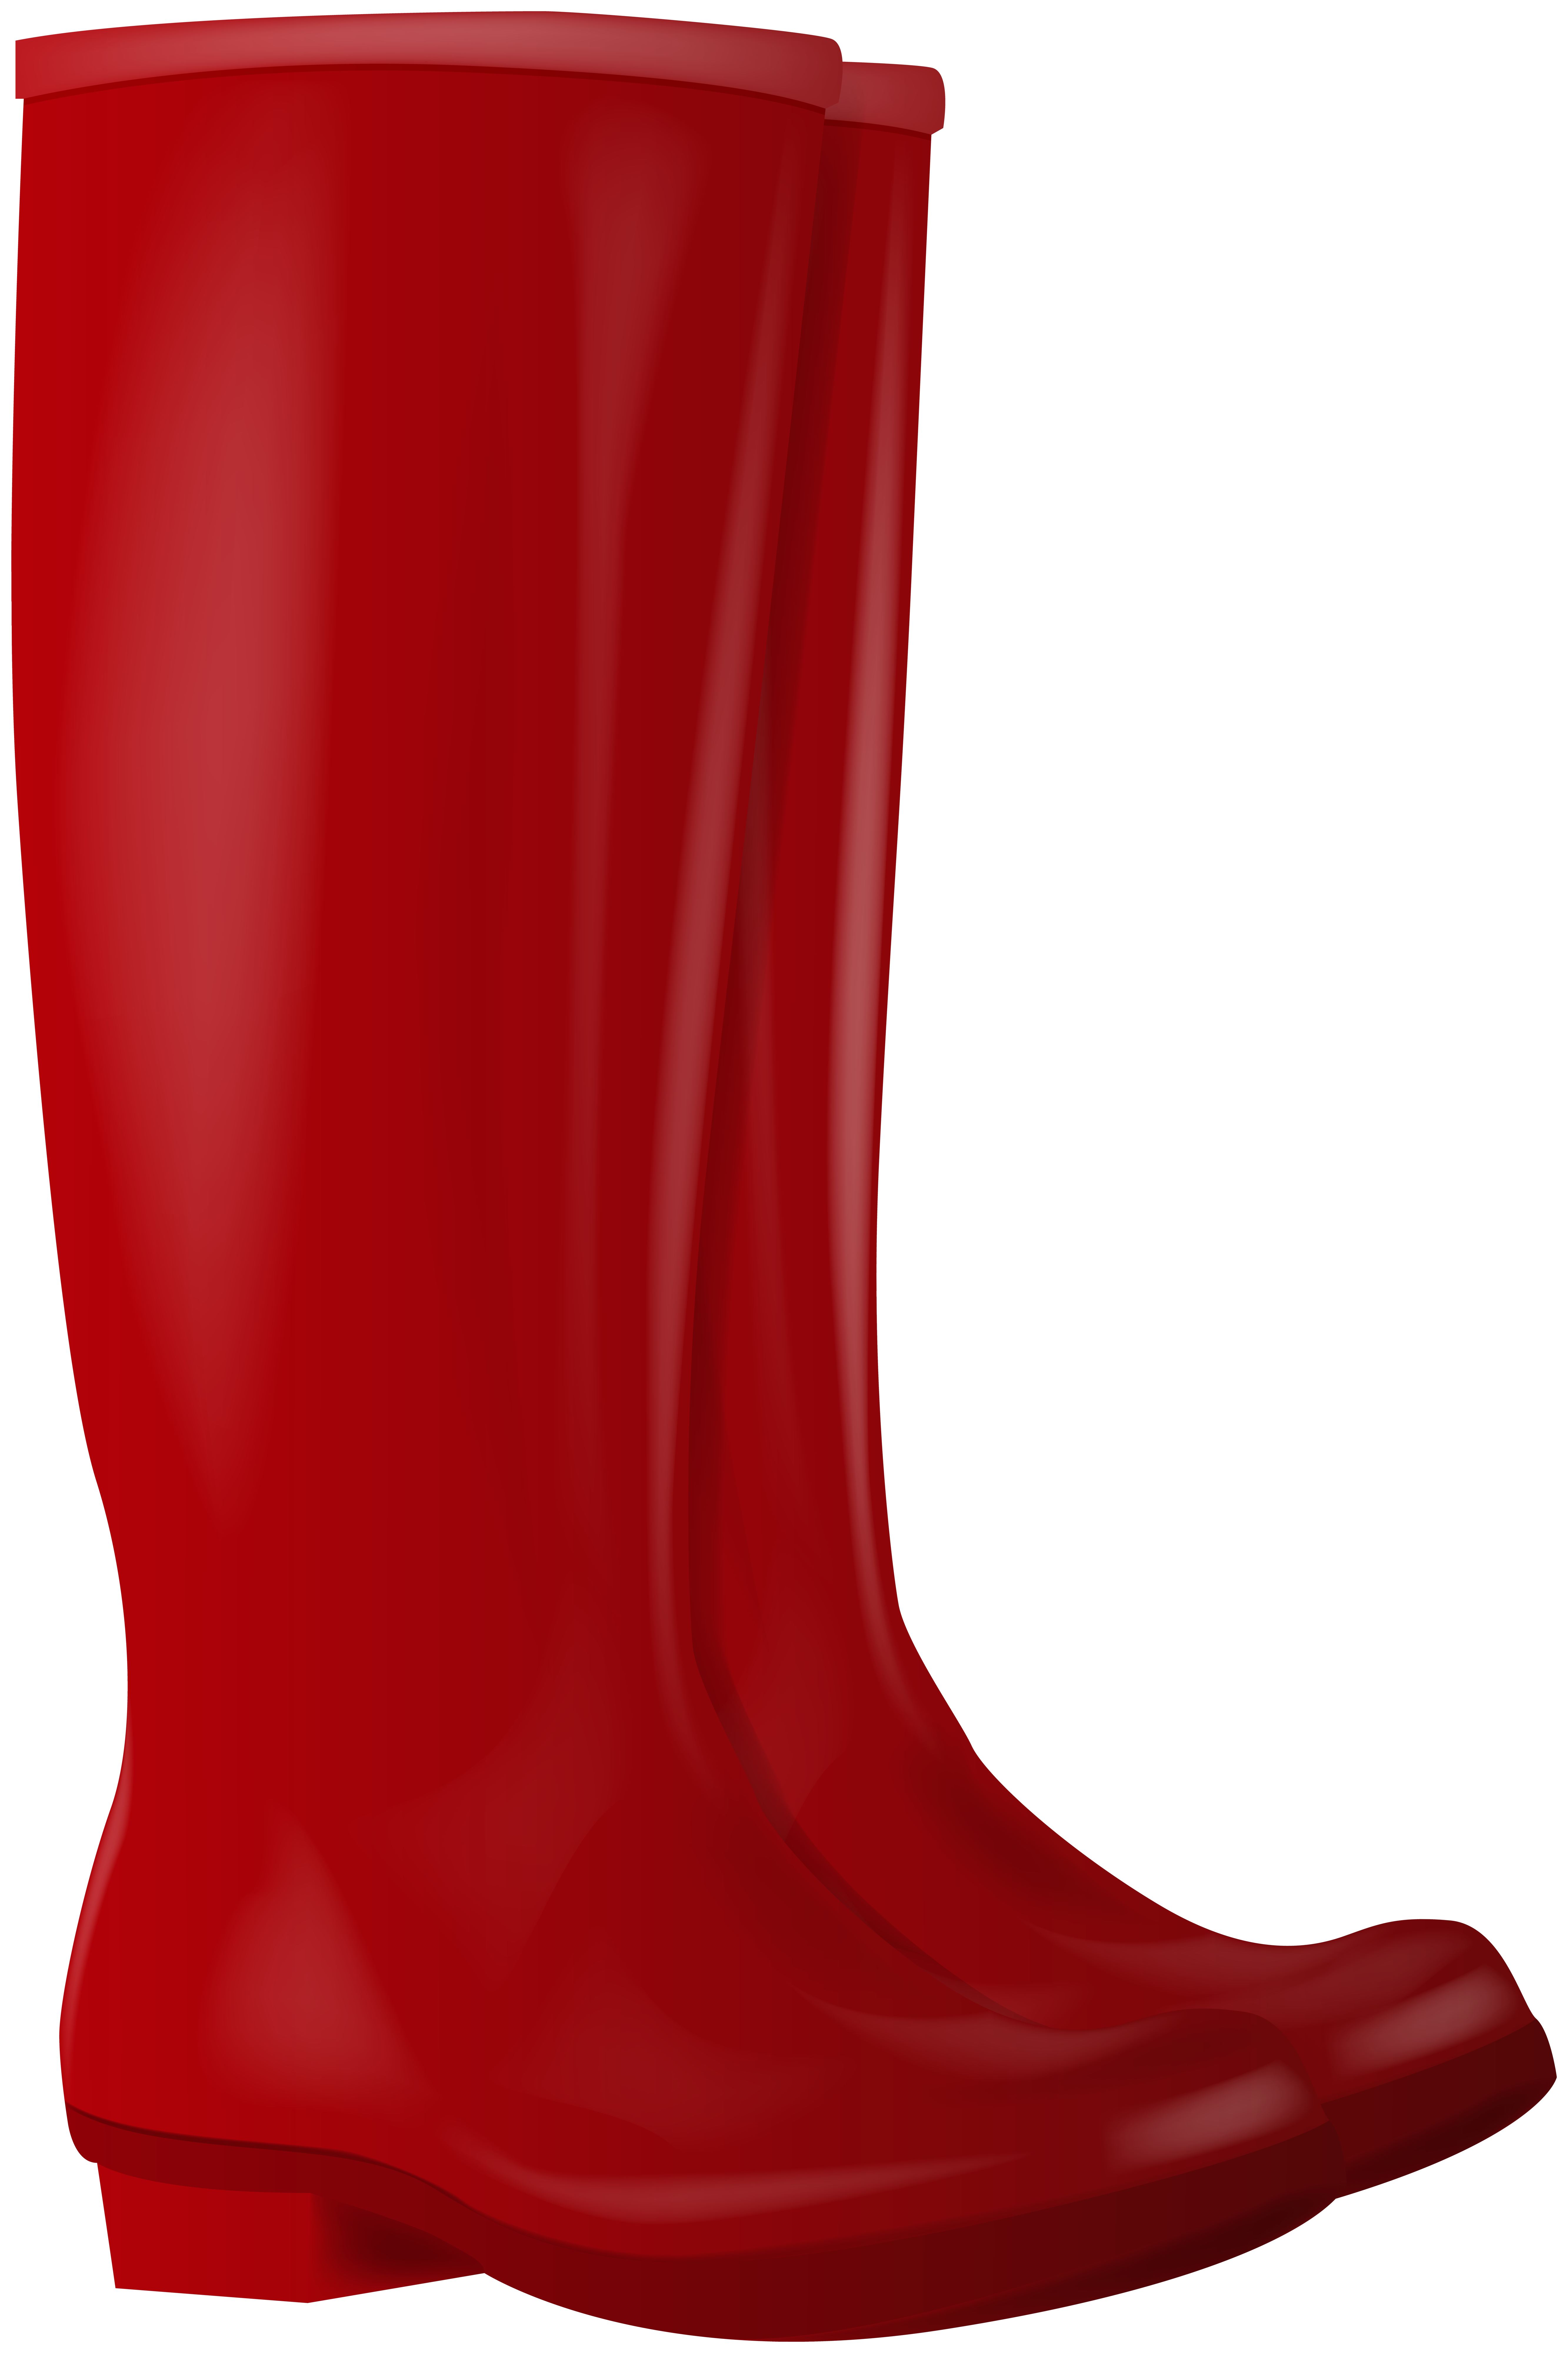 Clip Arts Related To : red rain boots clip art. 